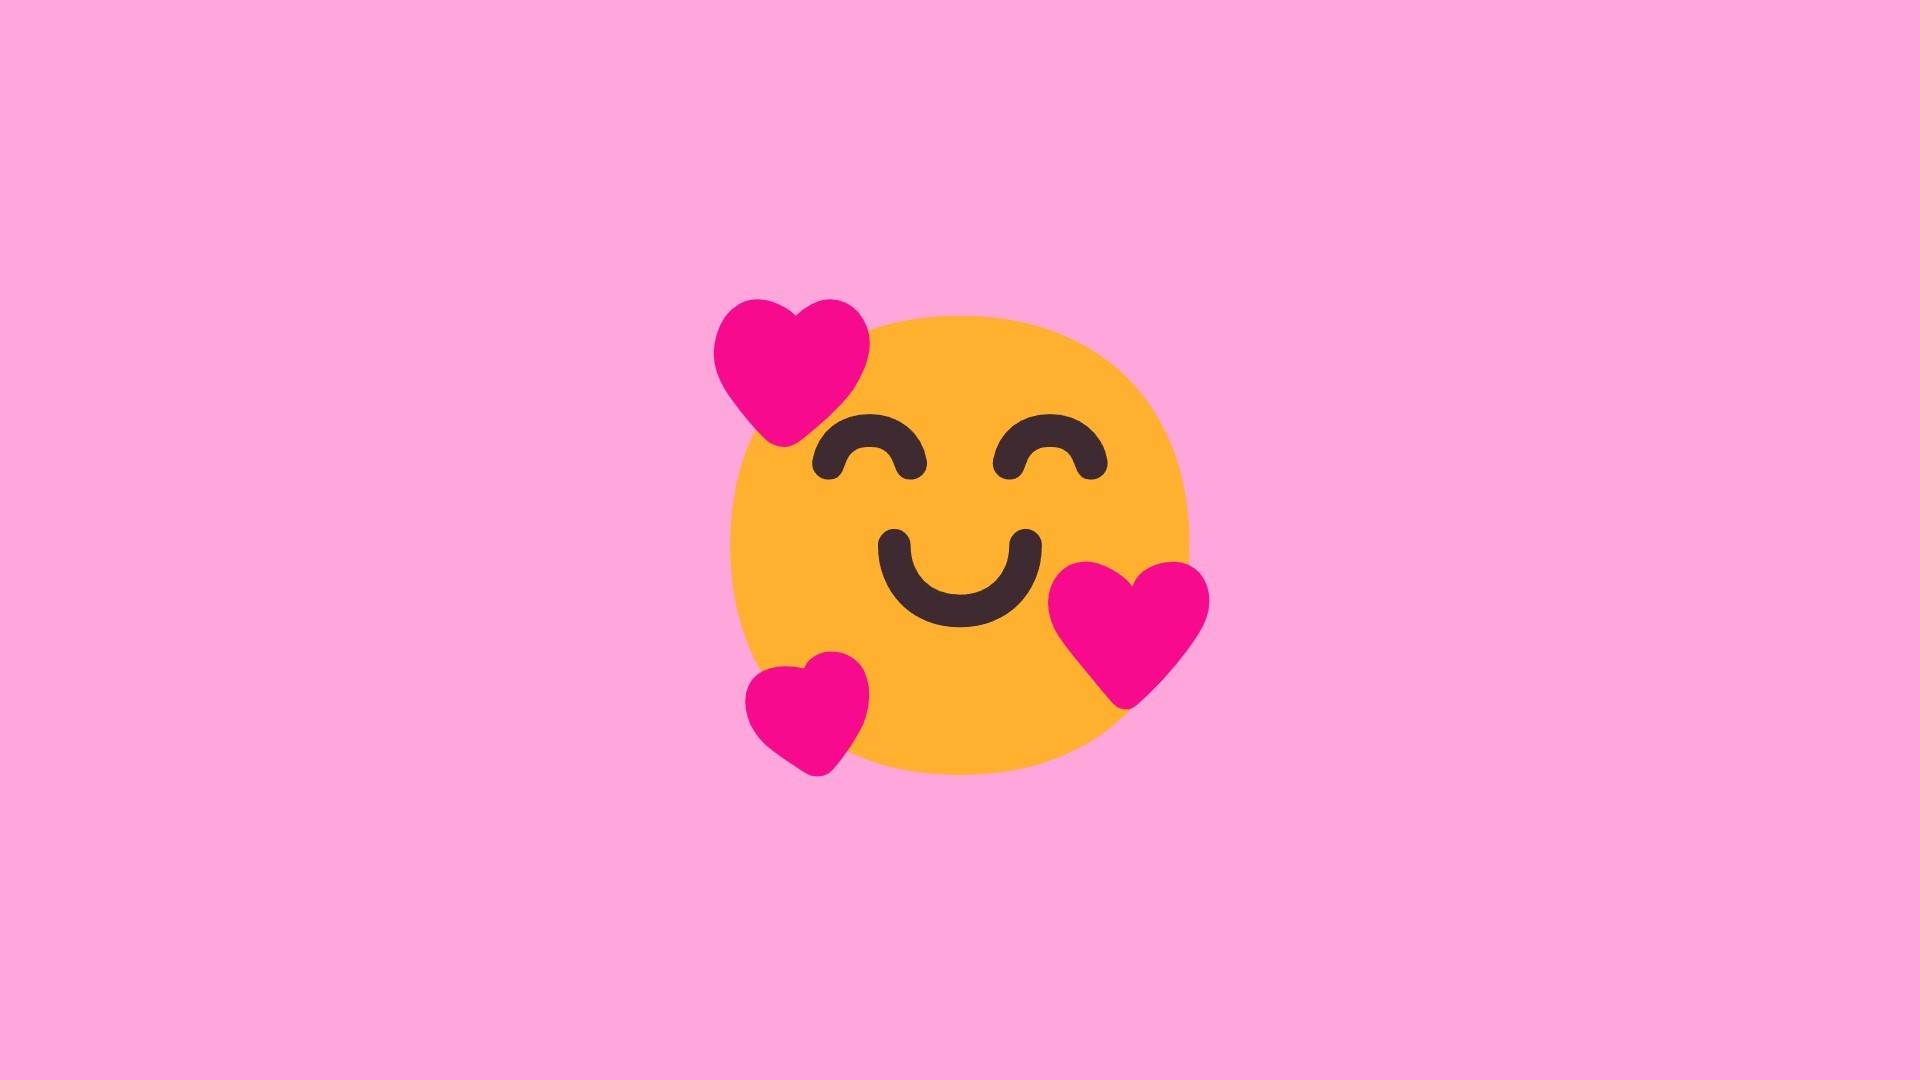 Emoji 8 smiling face with hearts